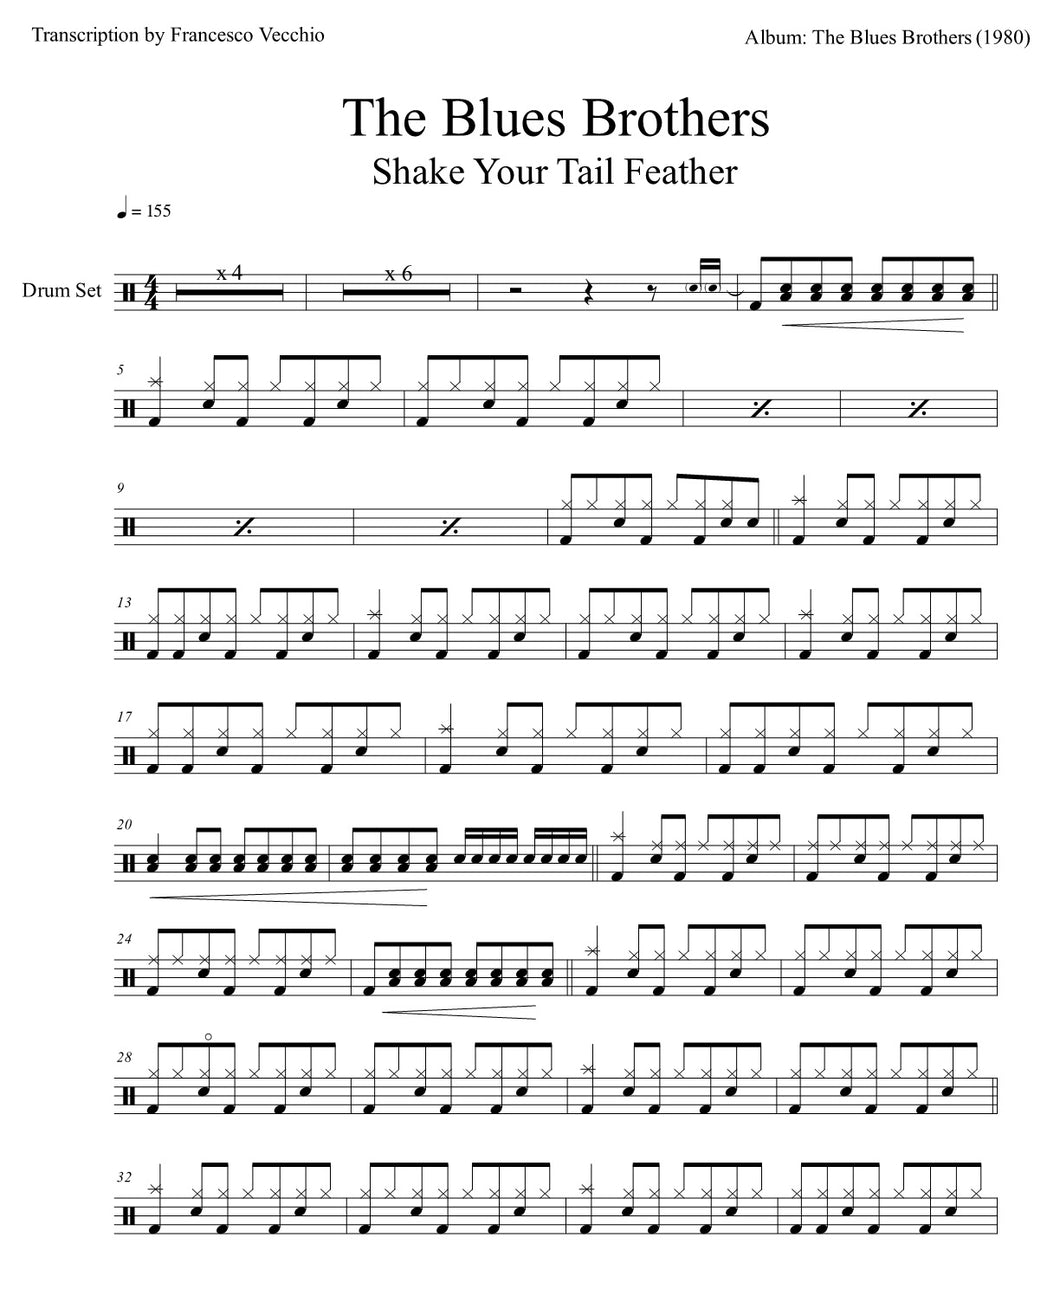 Shake a Tail Feather - The Blues Brothers - Full Drum Transcription / Drum Sheet Music - FrancisDrummingBlog.com